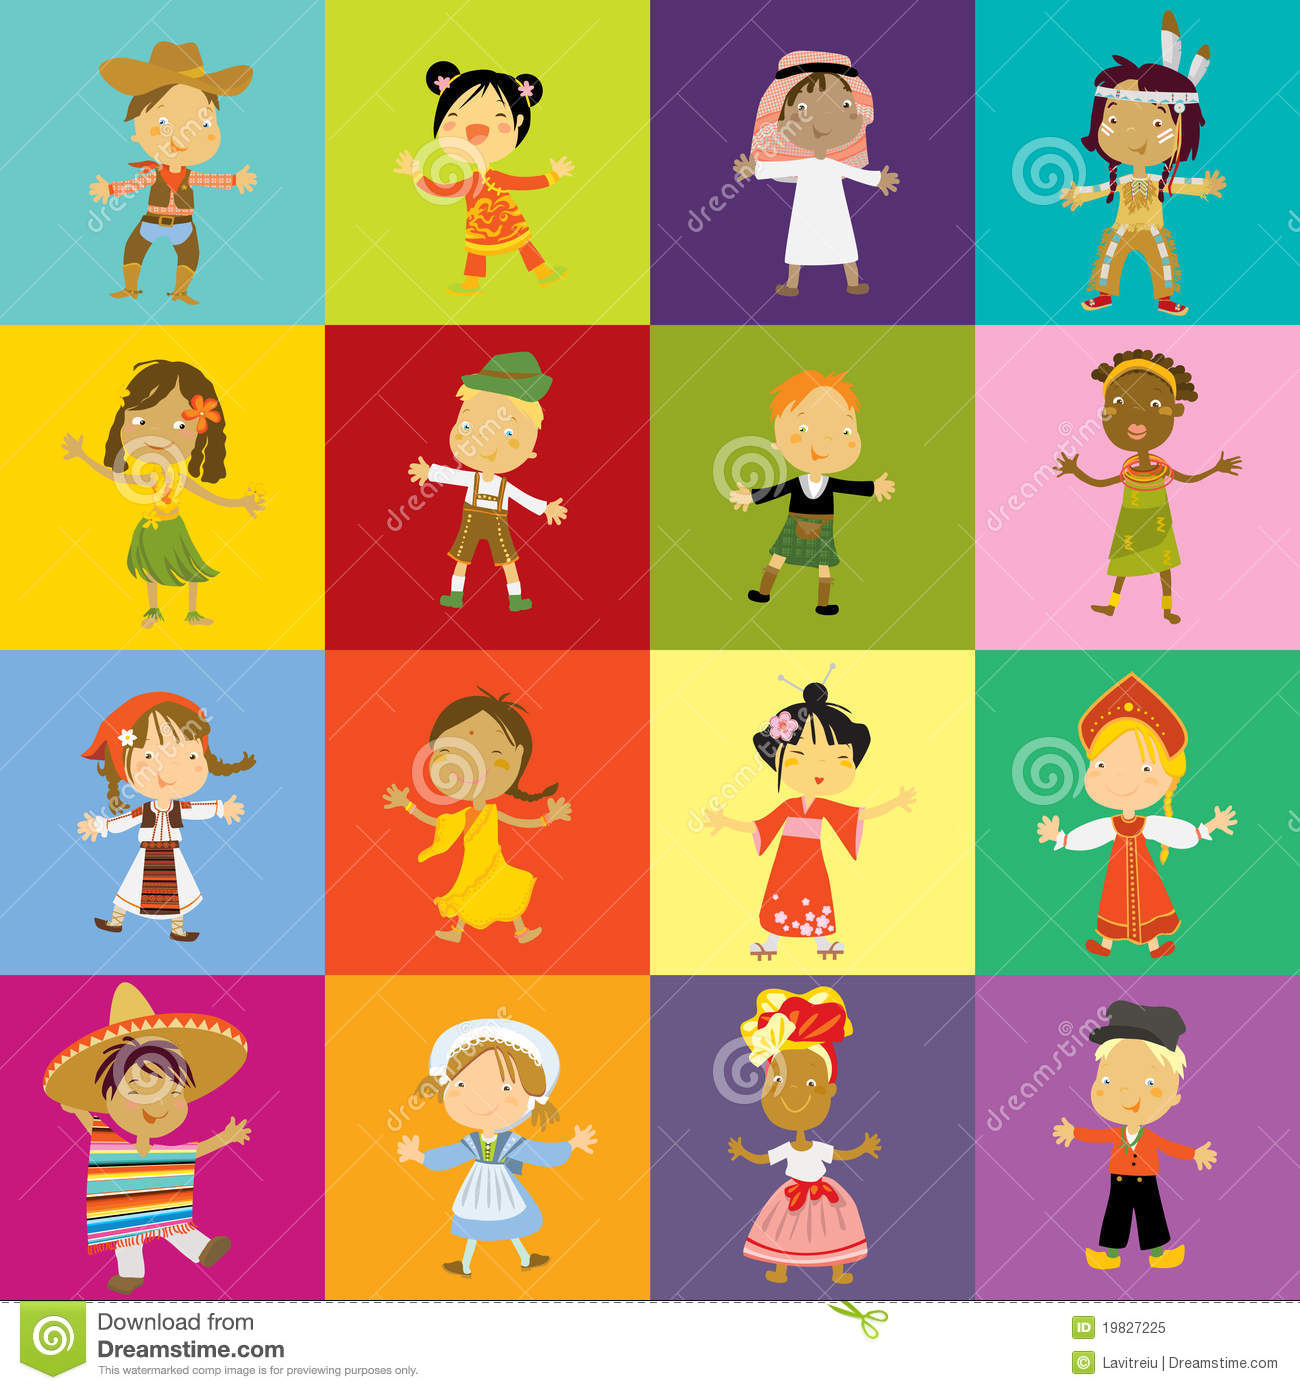 Kids Cultural Diversity Royalty Free Stock Photo   Image  19827225